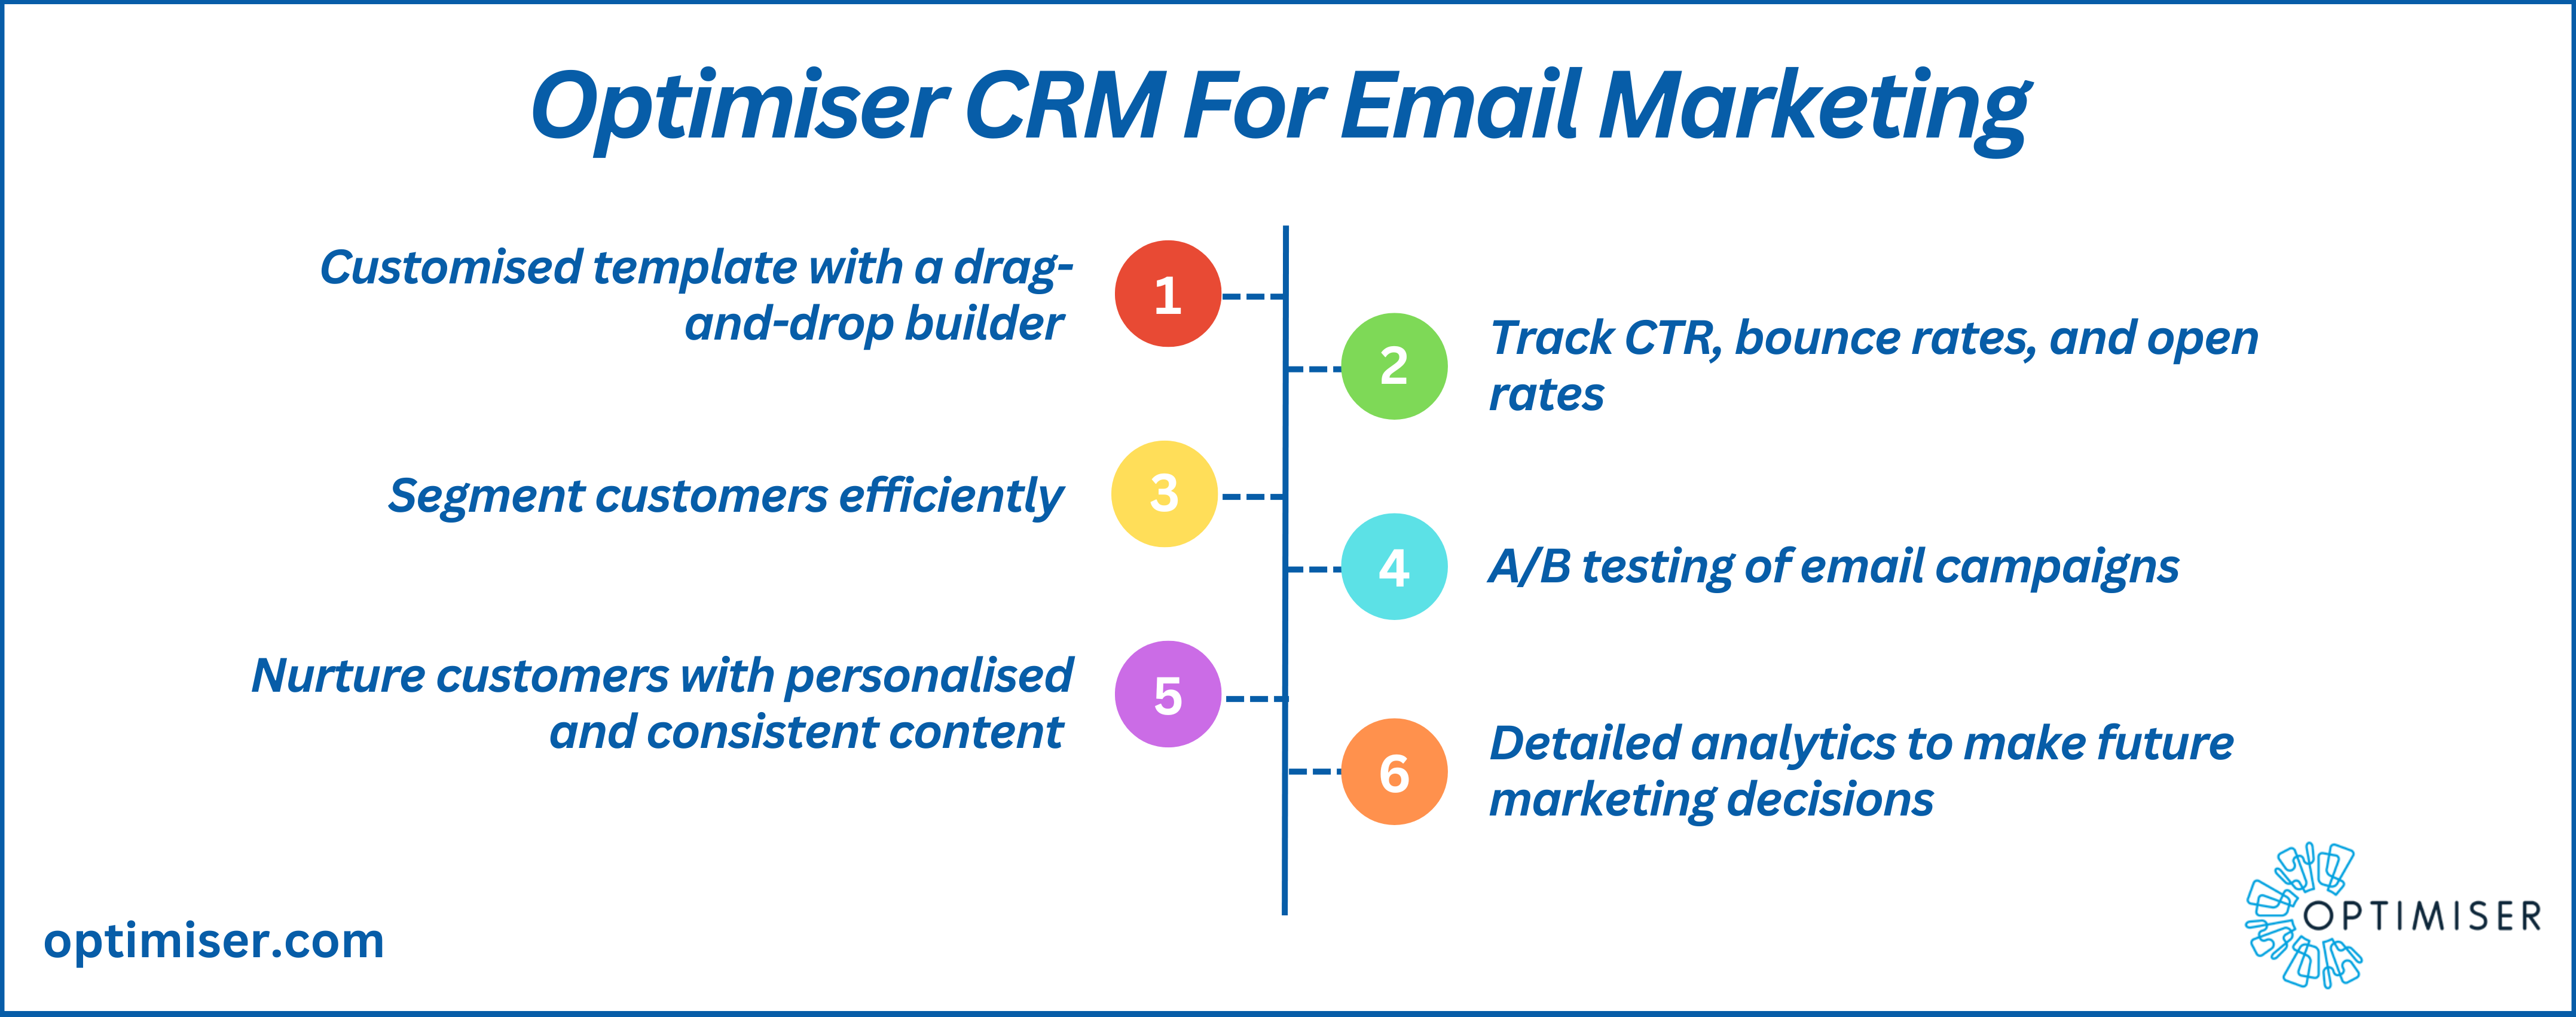 email marketing crm